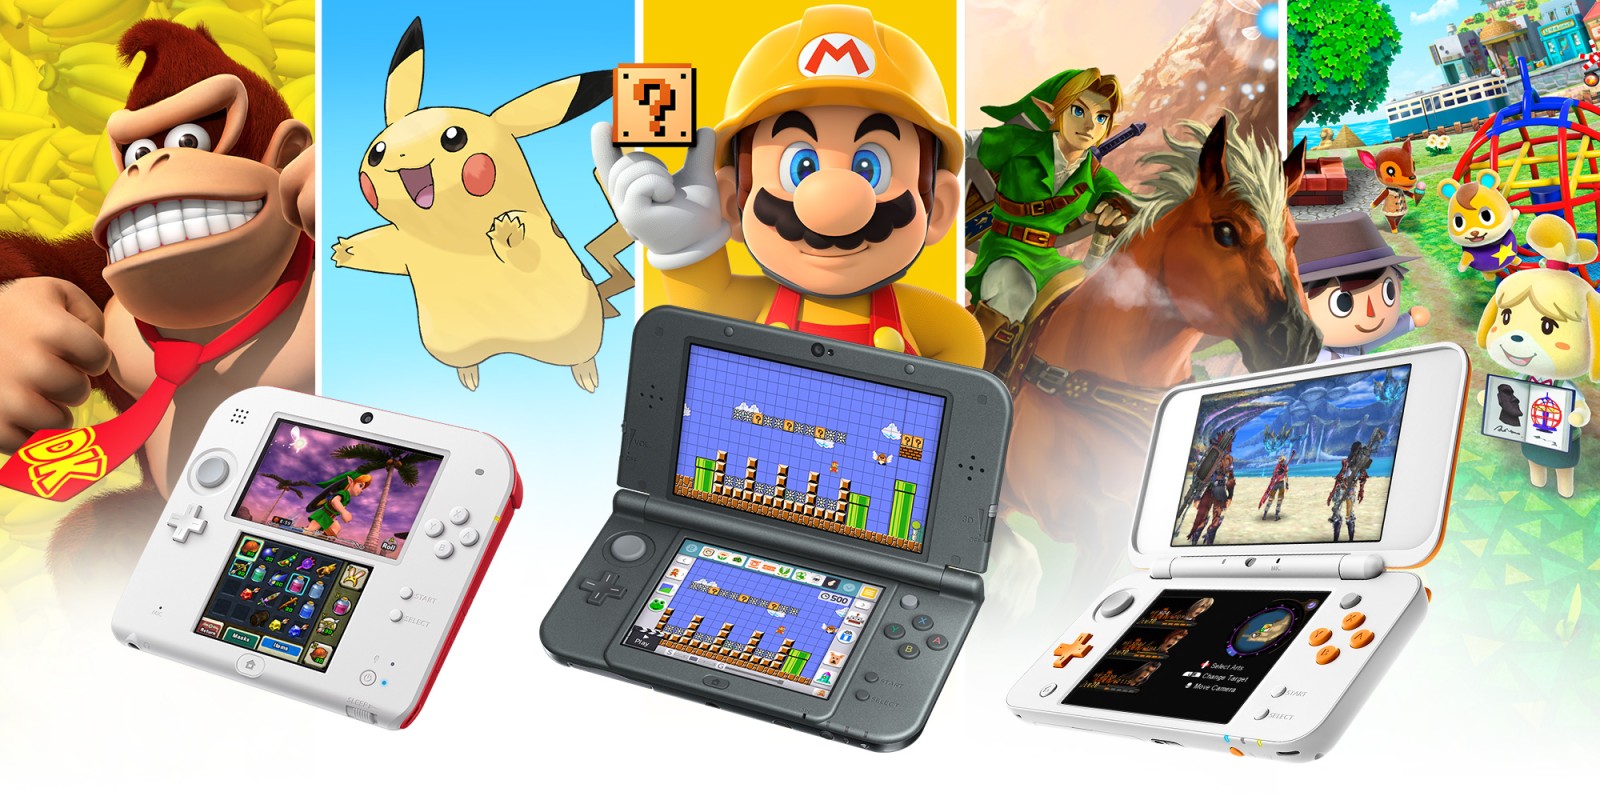 Nintendo has now officially stopped production of the 3DS